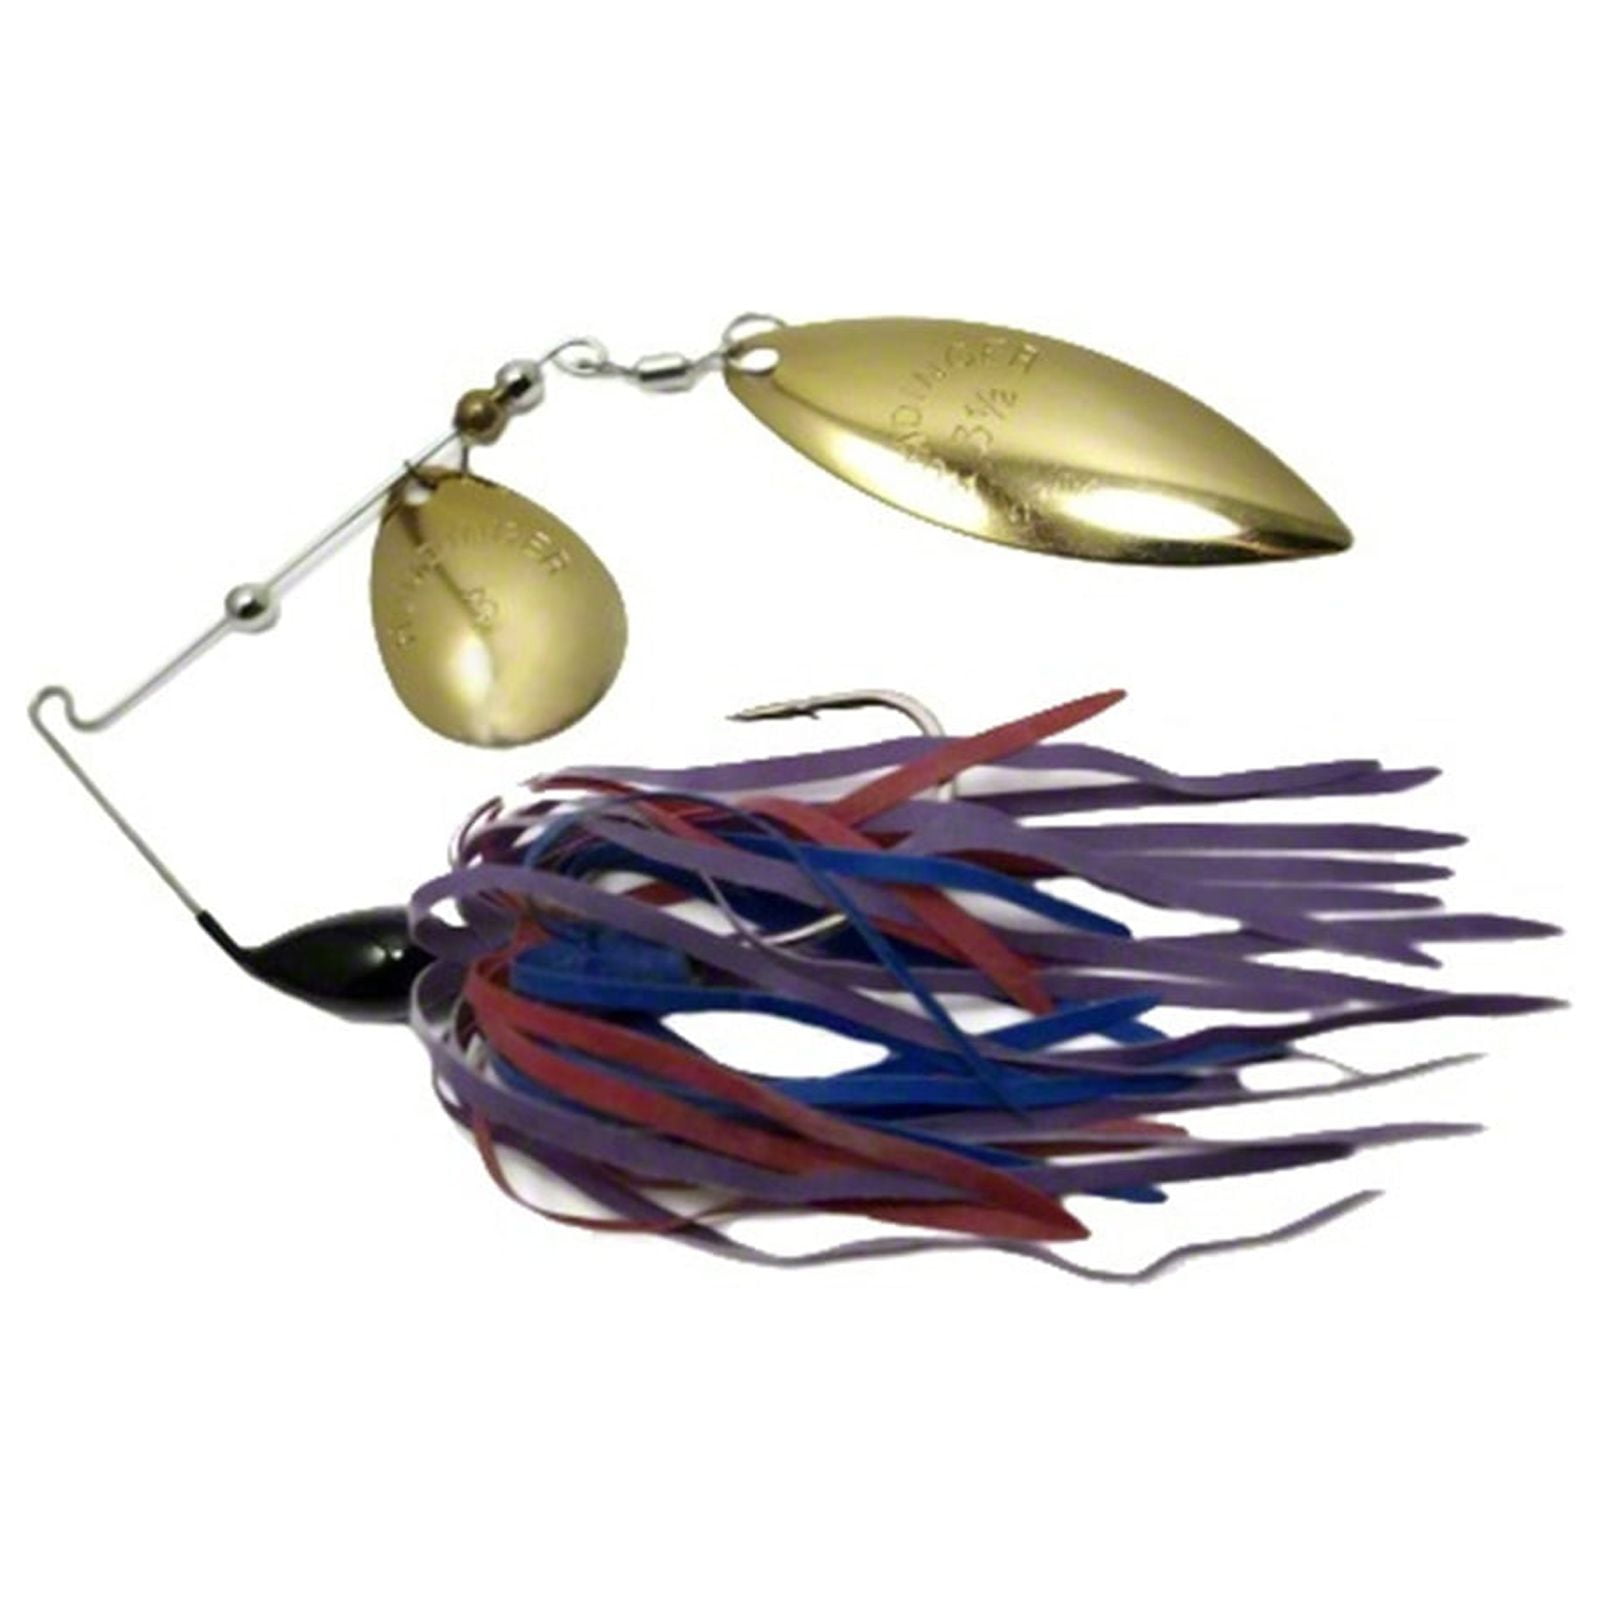 Humdinger 1/4oz Spinnerbait Gld Colo Gld Wil Pur/Red/Blu Skirt Pack of 6,  02-S 